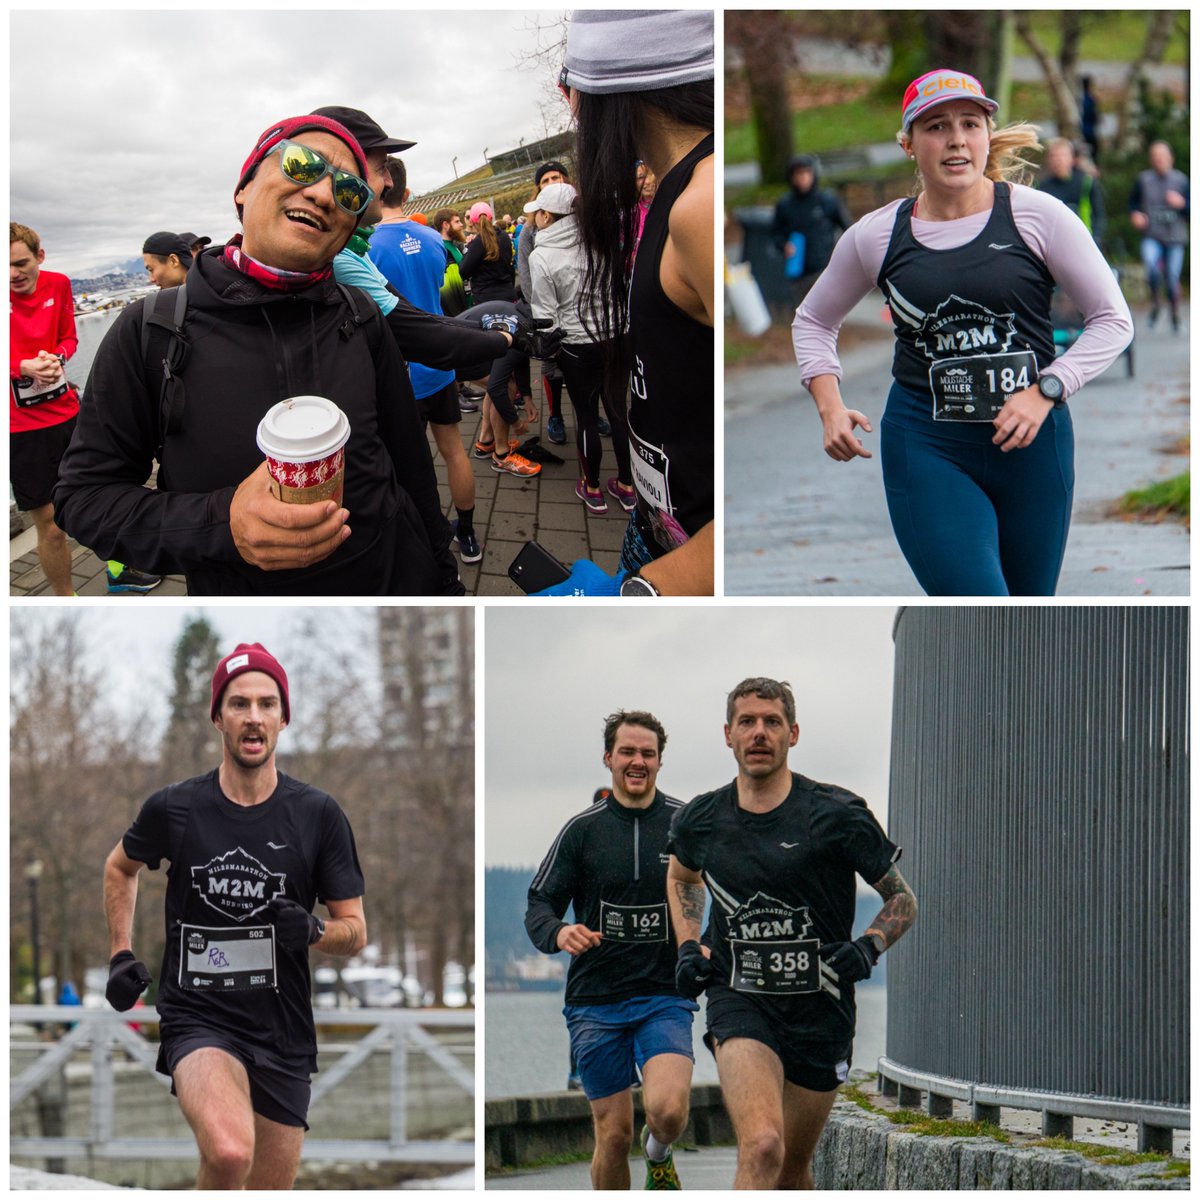 Learn from the pros of @mile2marathon 💪🏼 Group workout memberships in Vancouver and Burnaby led by the likes of @robbiedxc and @jkent_ among others. They bring the 🔥 on Tuesdays, Wednesdays & Saturdays. More details available on their website #vancouver #runclub #mile2marathon